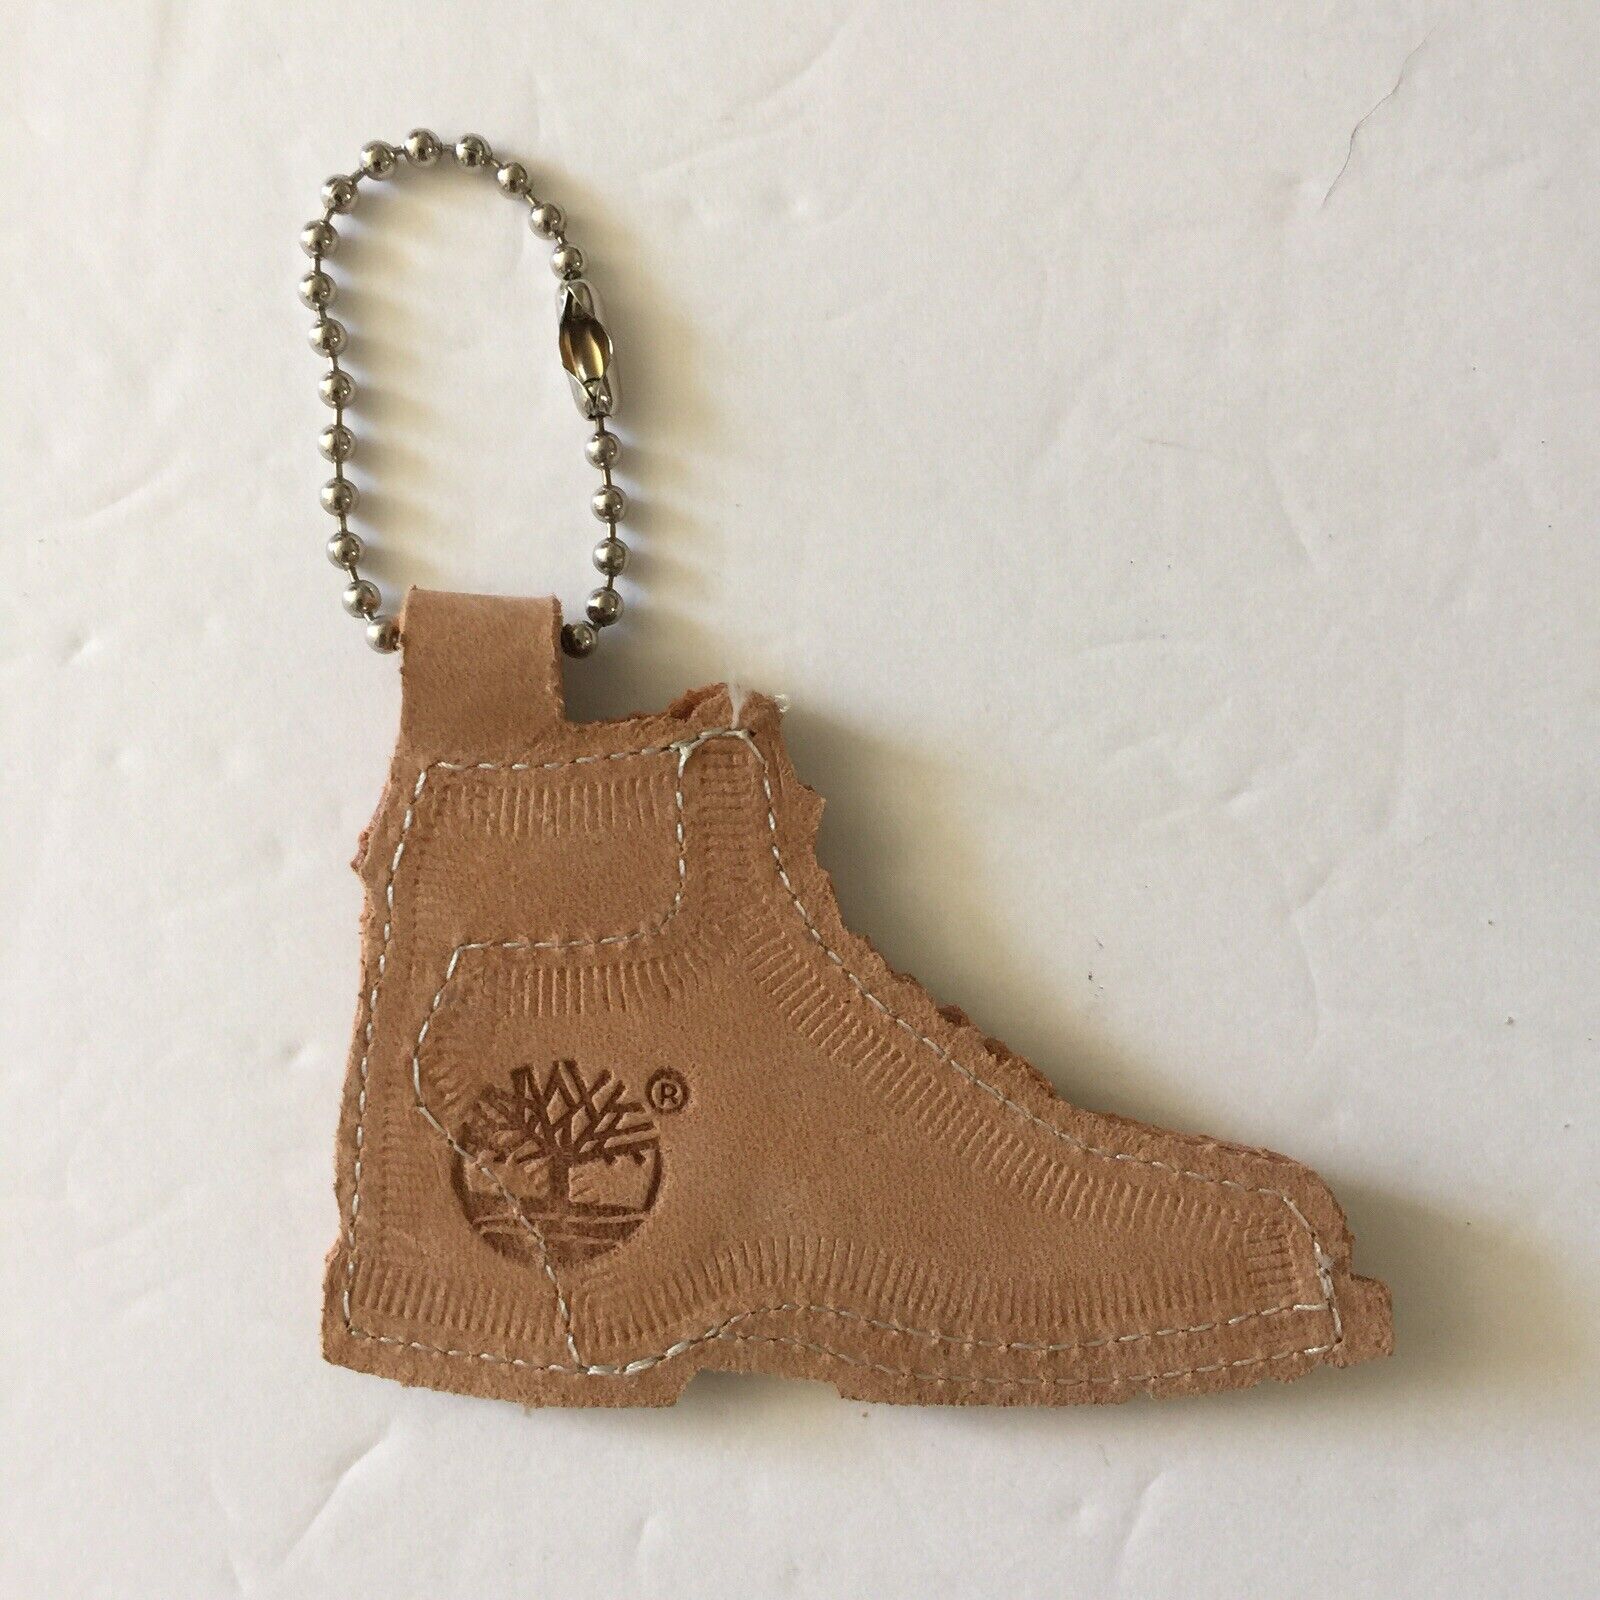 Timberland Boot - Leather Key Chain Tag – Light Tan